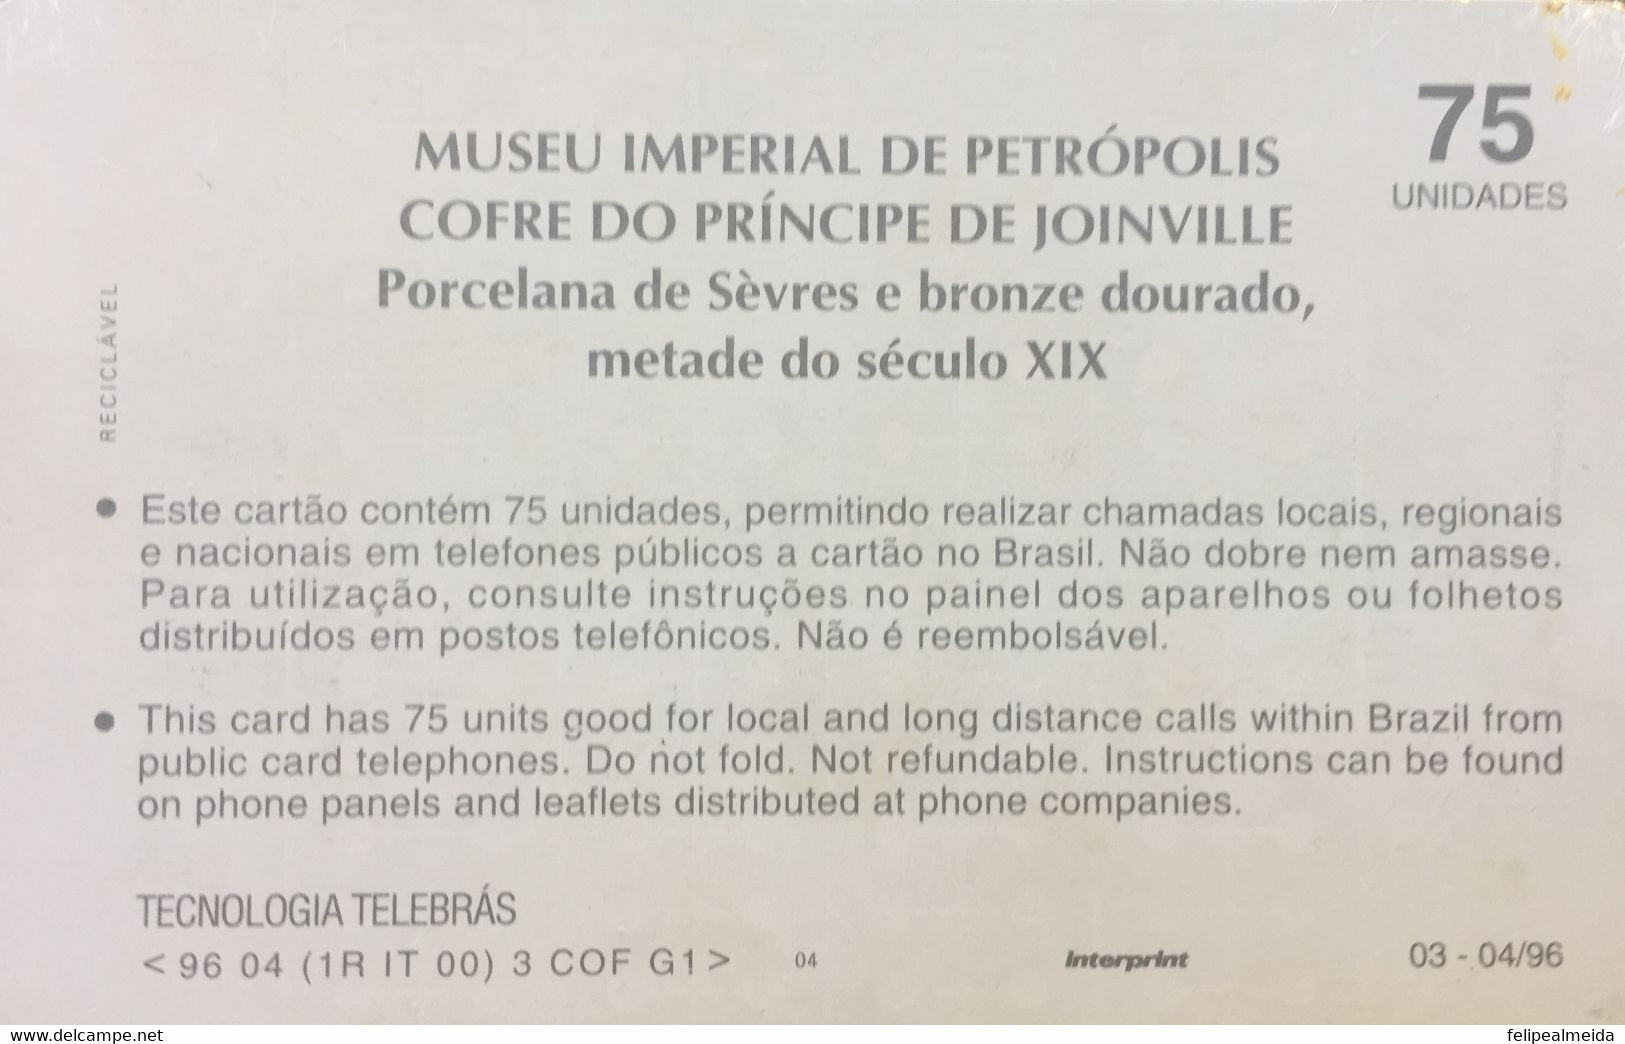 Phone Card Manufactured By Telebras In 1996 - Series Museums - Imperial Museum Of Pretrópolis - Coffer Of The Prince Of - Kultur